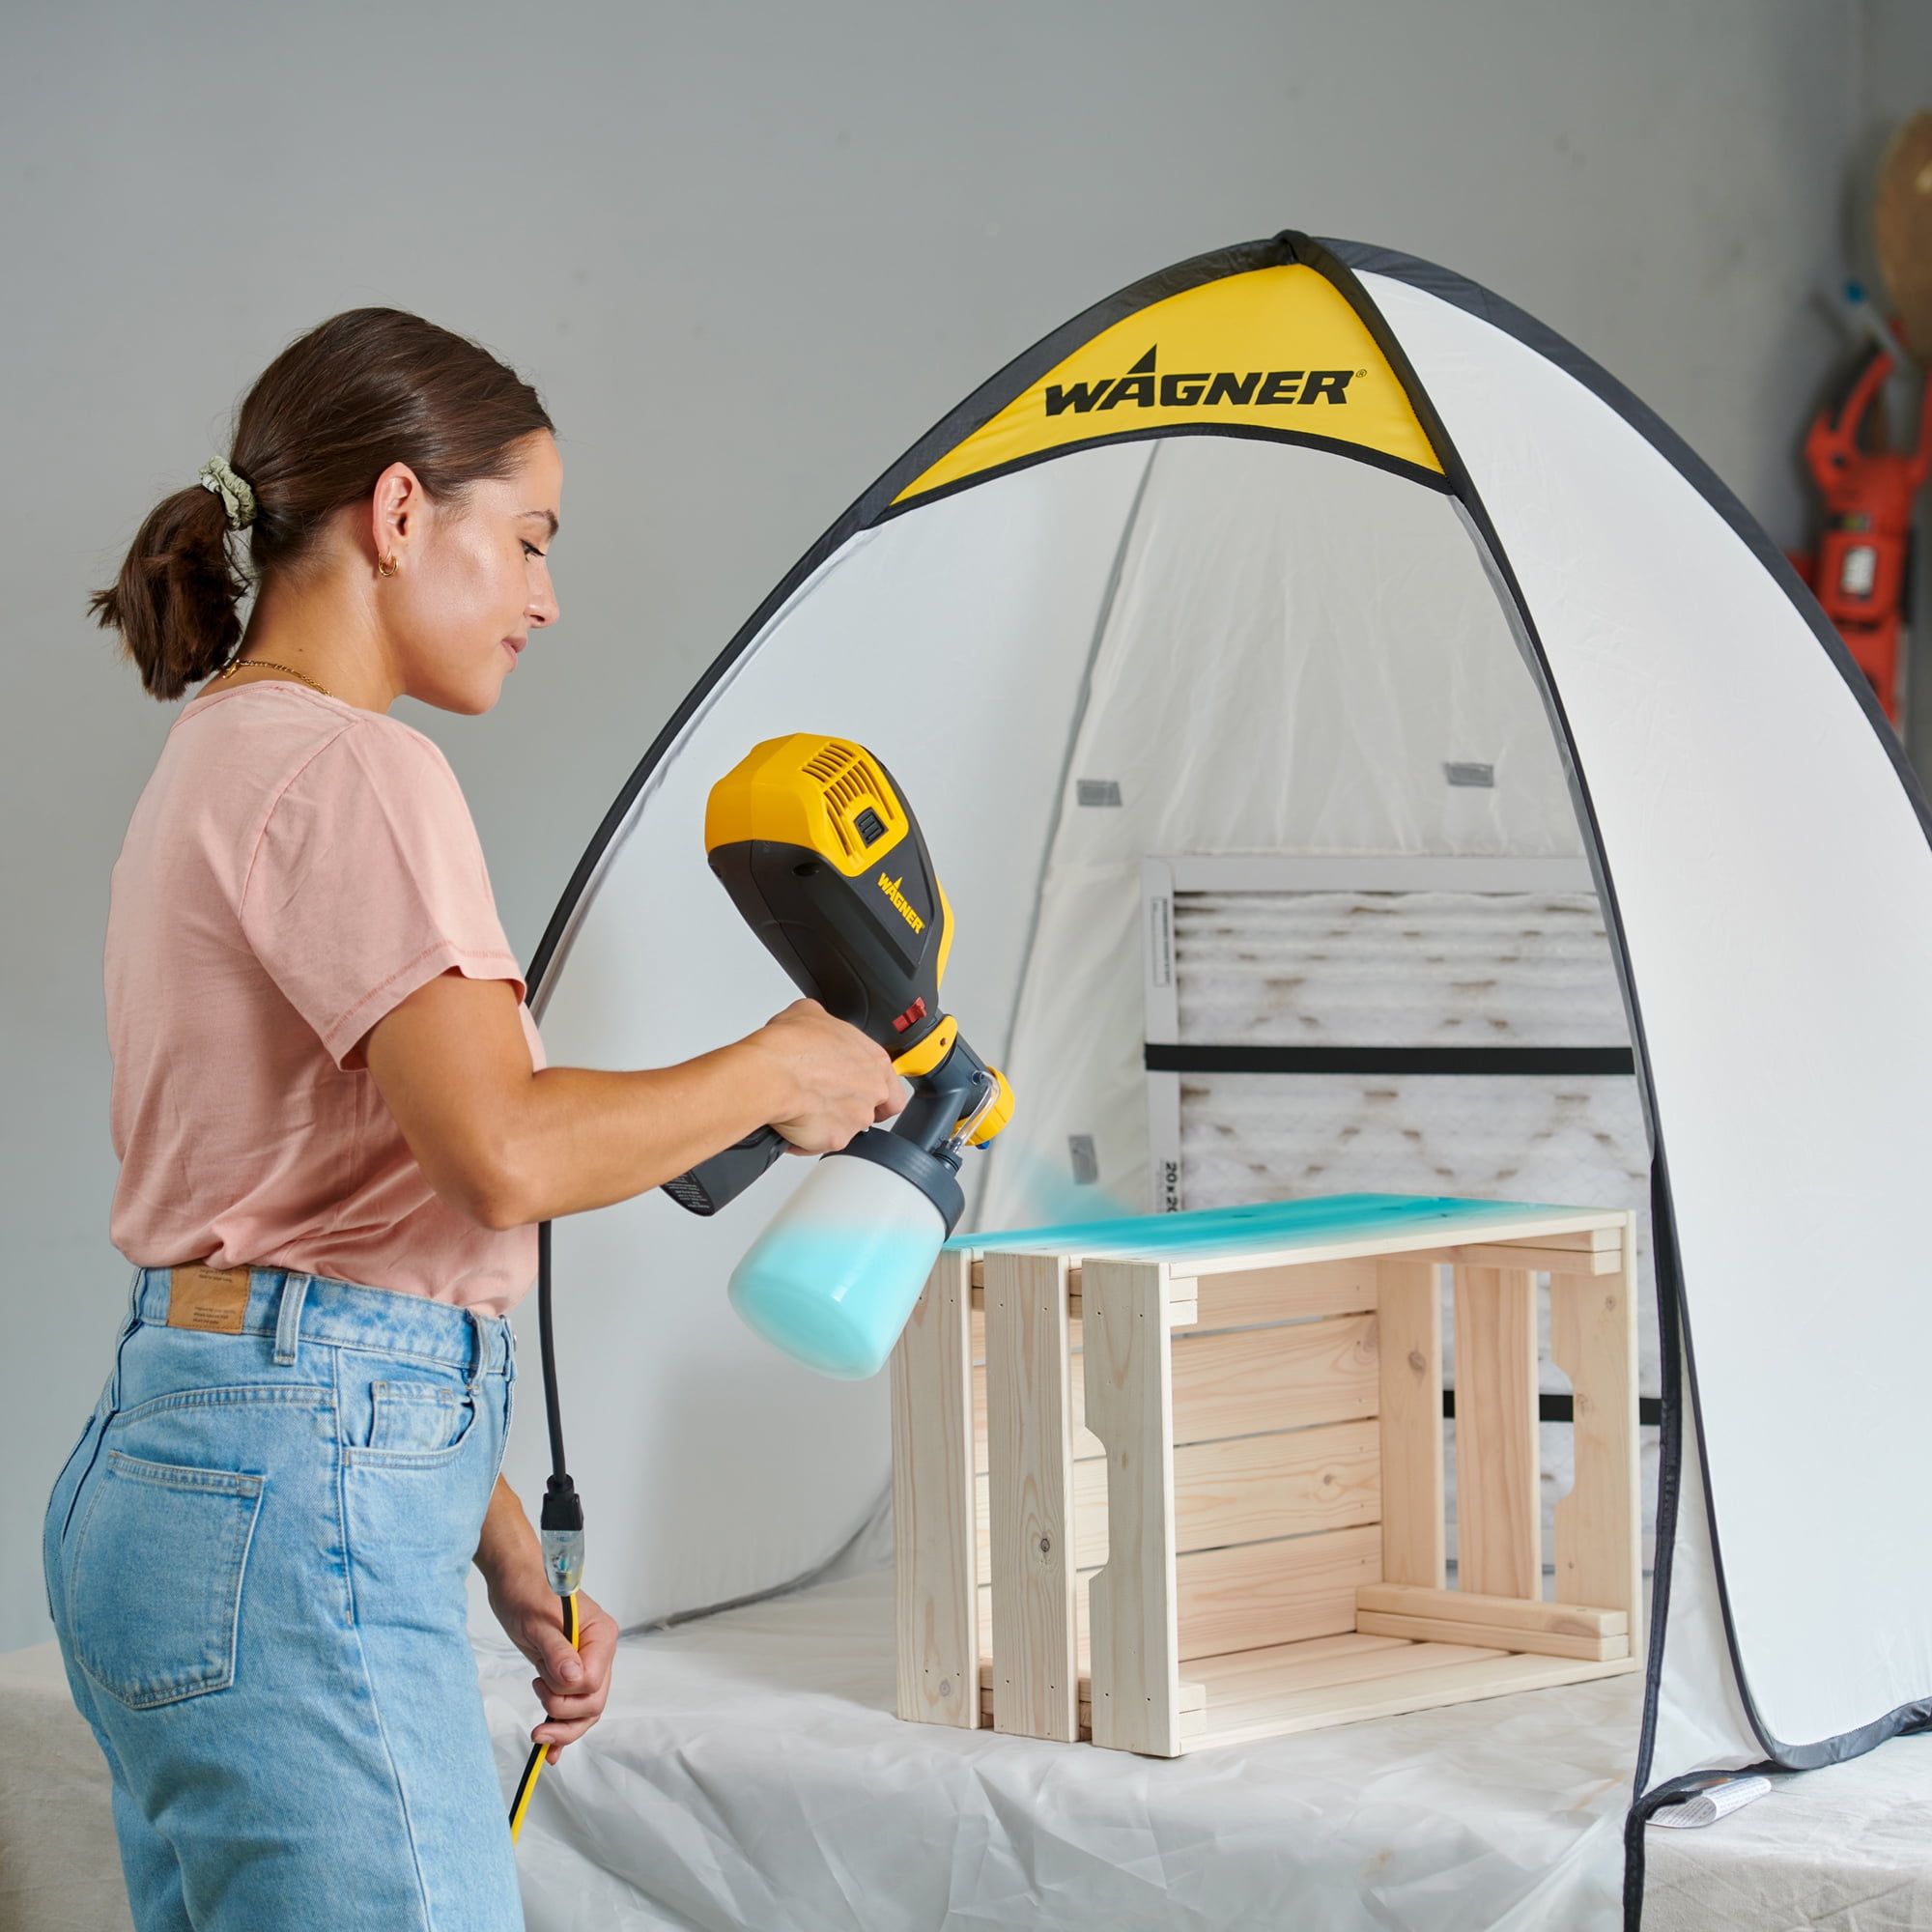 Wagner Spraytech C900051 HomeRight Small Spray Shelter Tent Portable For  DIY Spray Painting, Hobby Paint Booth Tool Painting Station